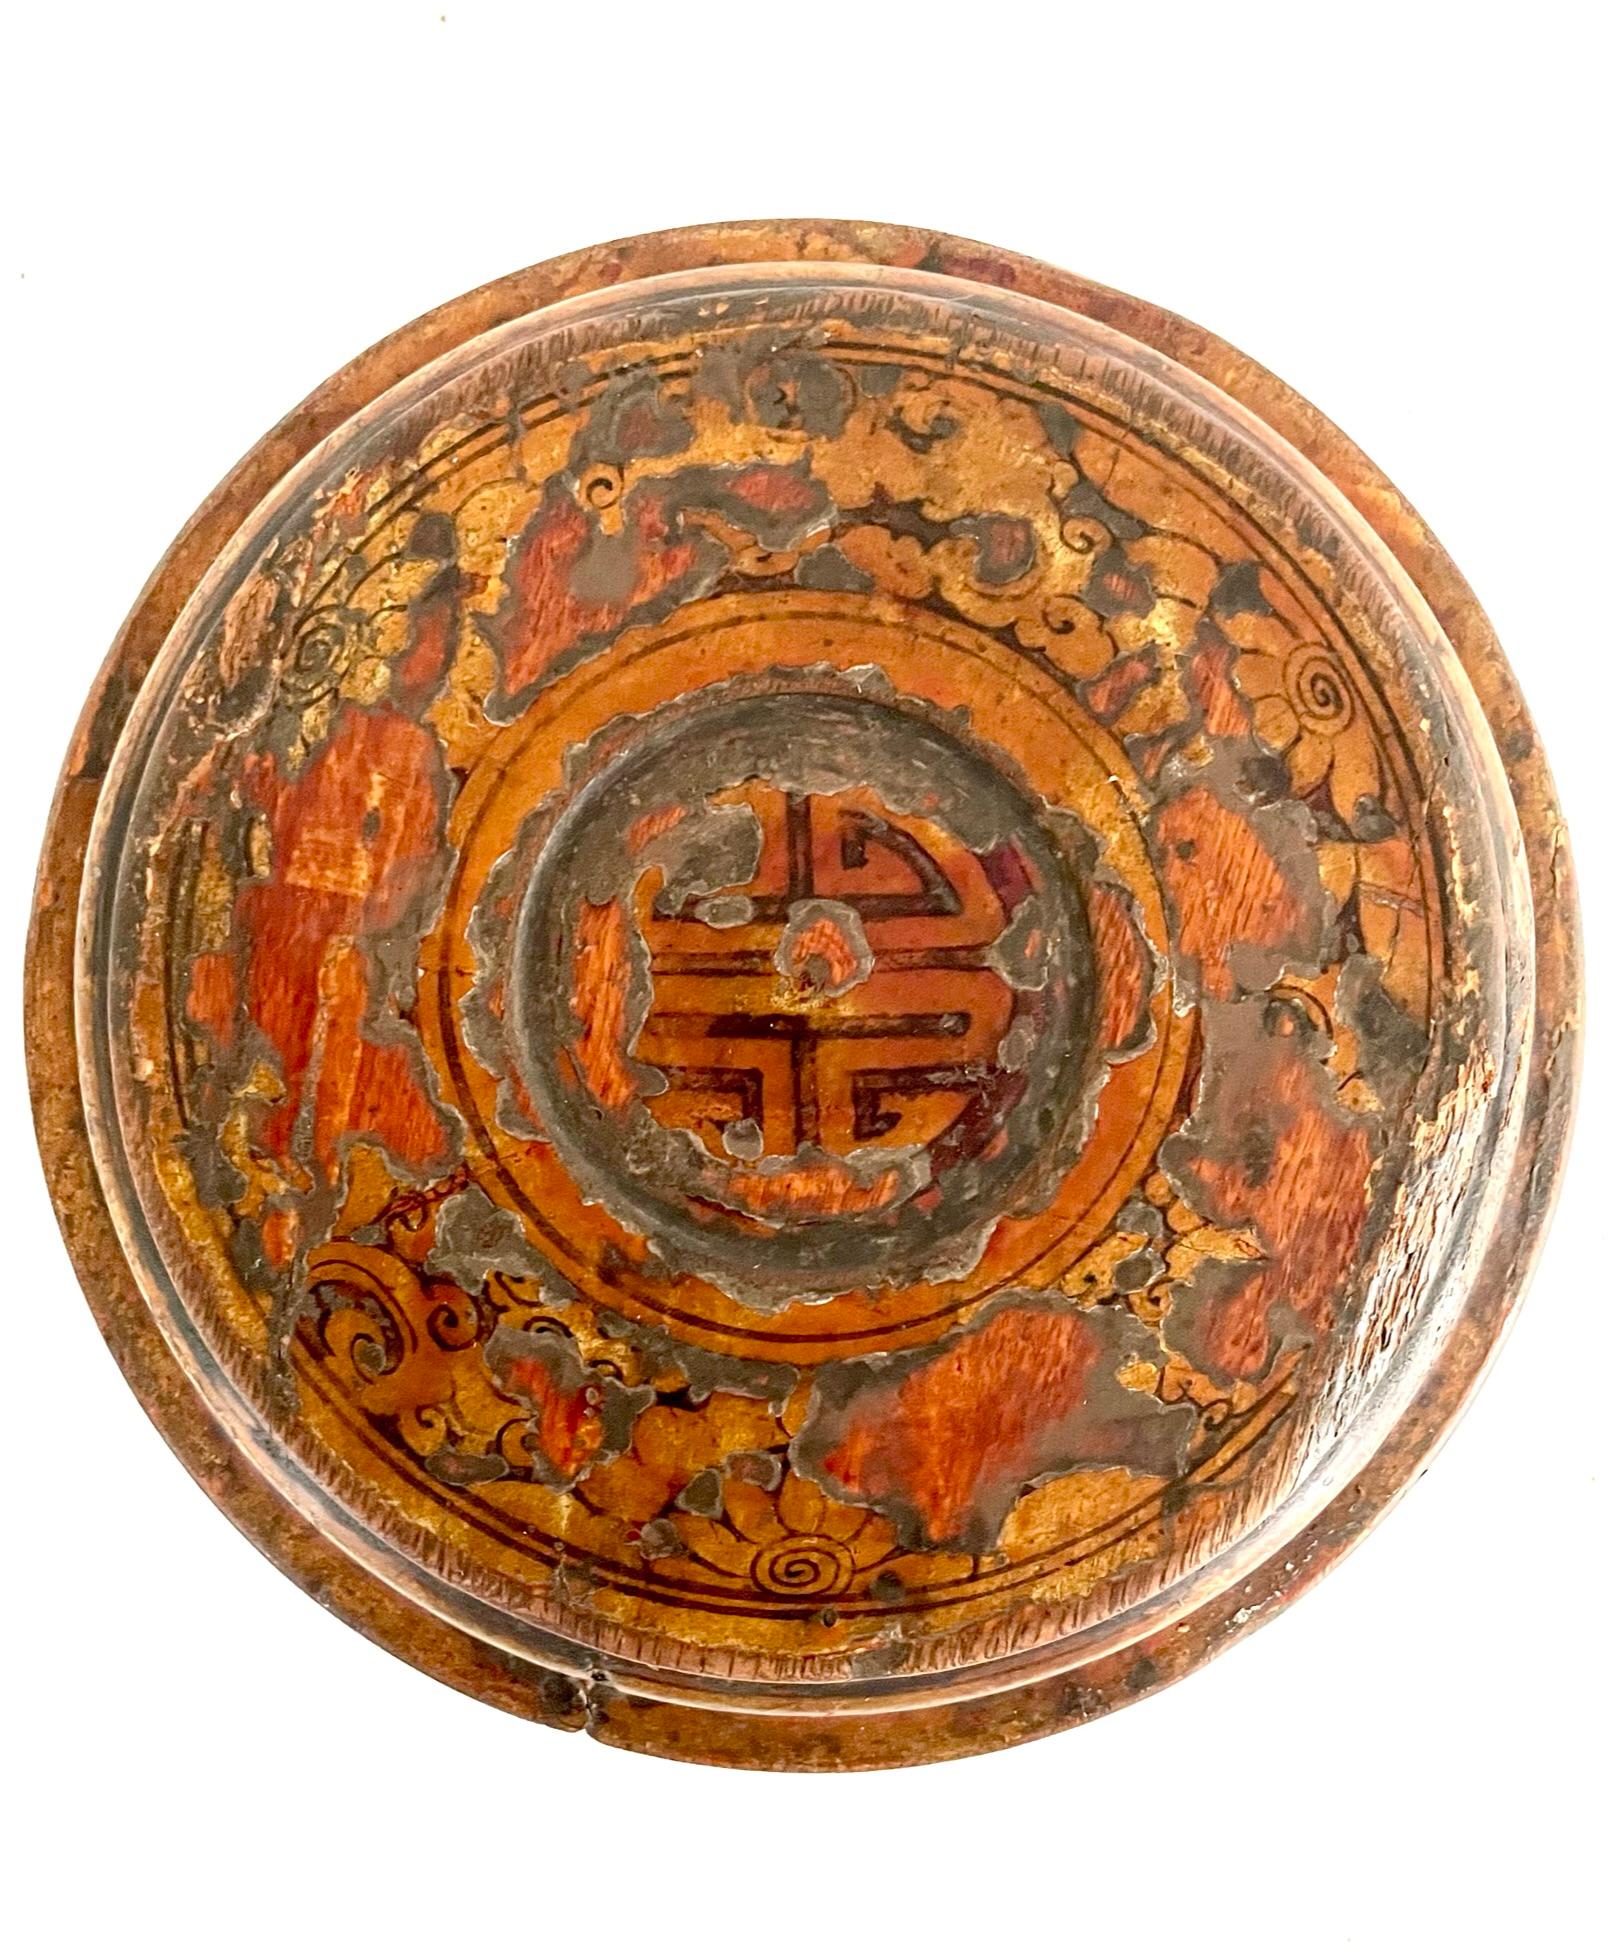 19th Century, Gilded Lacquer Tsampa Bowl from Tibet For Sale 4